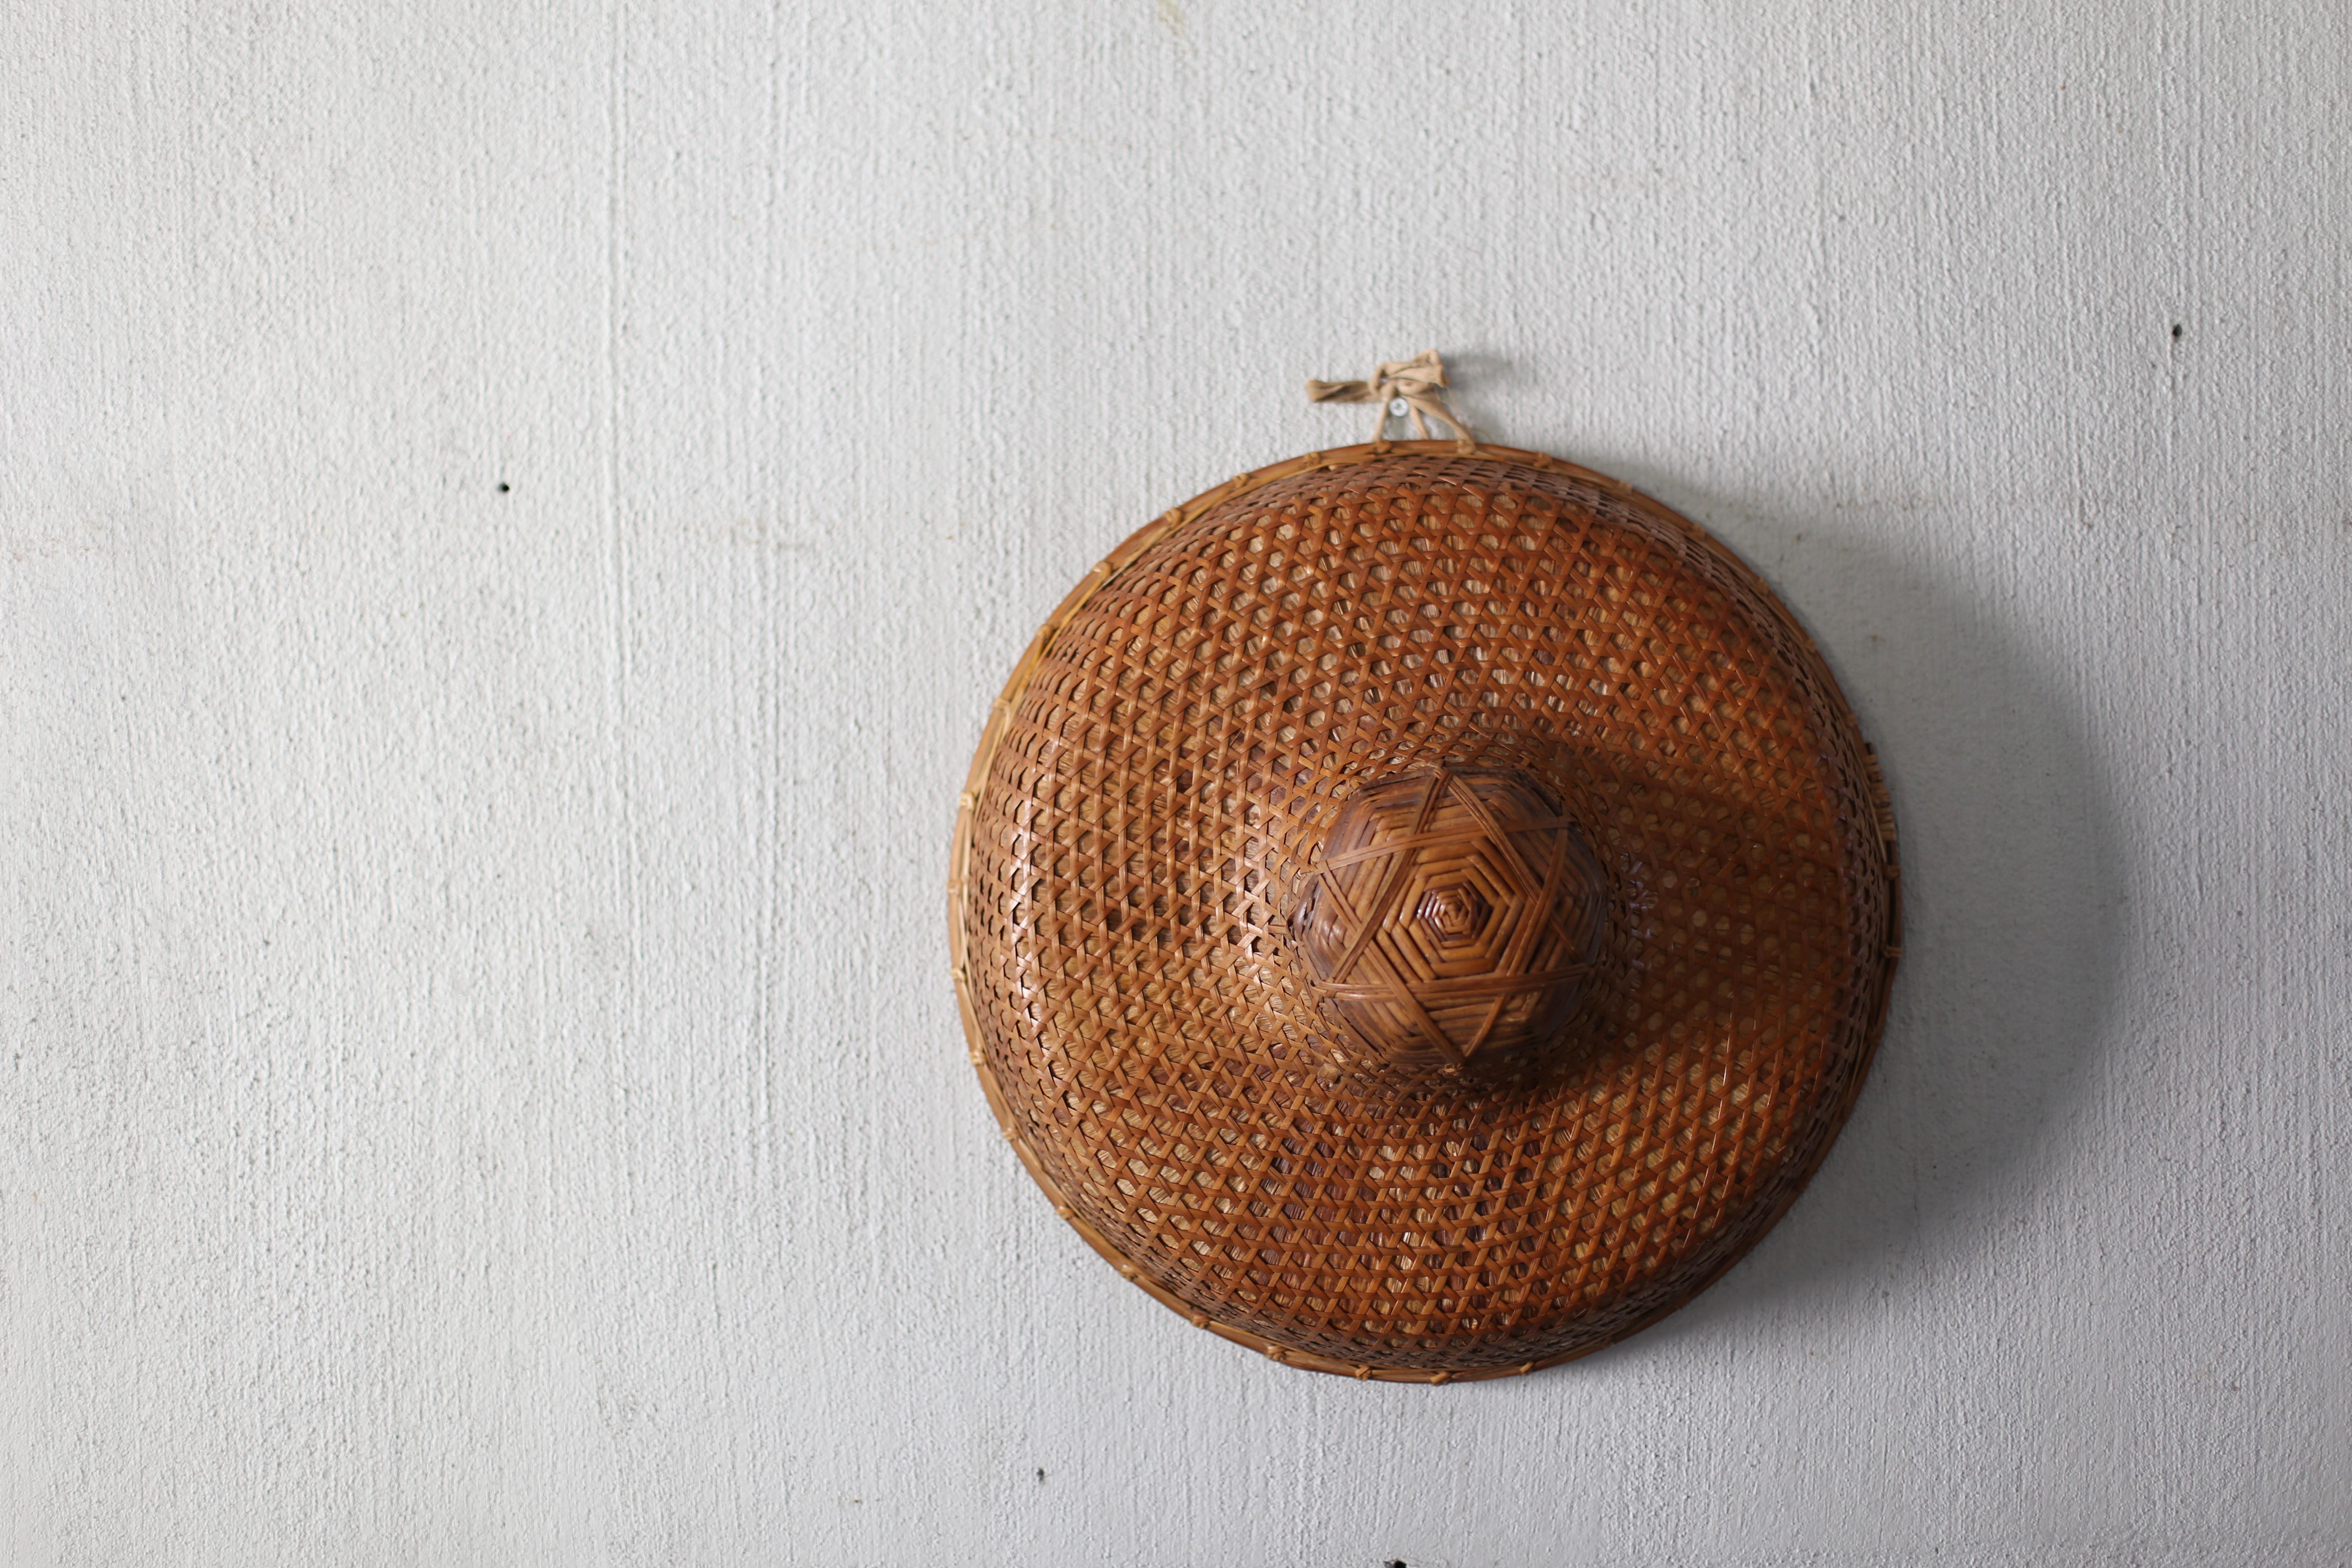 An old hat hand-woven bamboo and straw.
We found this in Japan, but it's not clear where or when it was made.
The texture of the bamboo that has changed over time is amazing.
This would be nice as a display object on the wall.
How about using it as